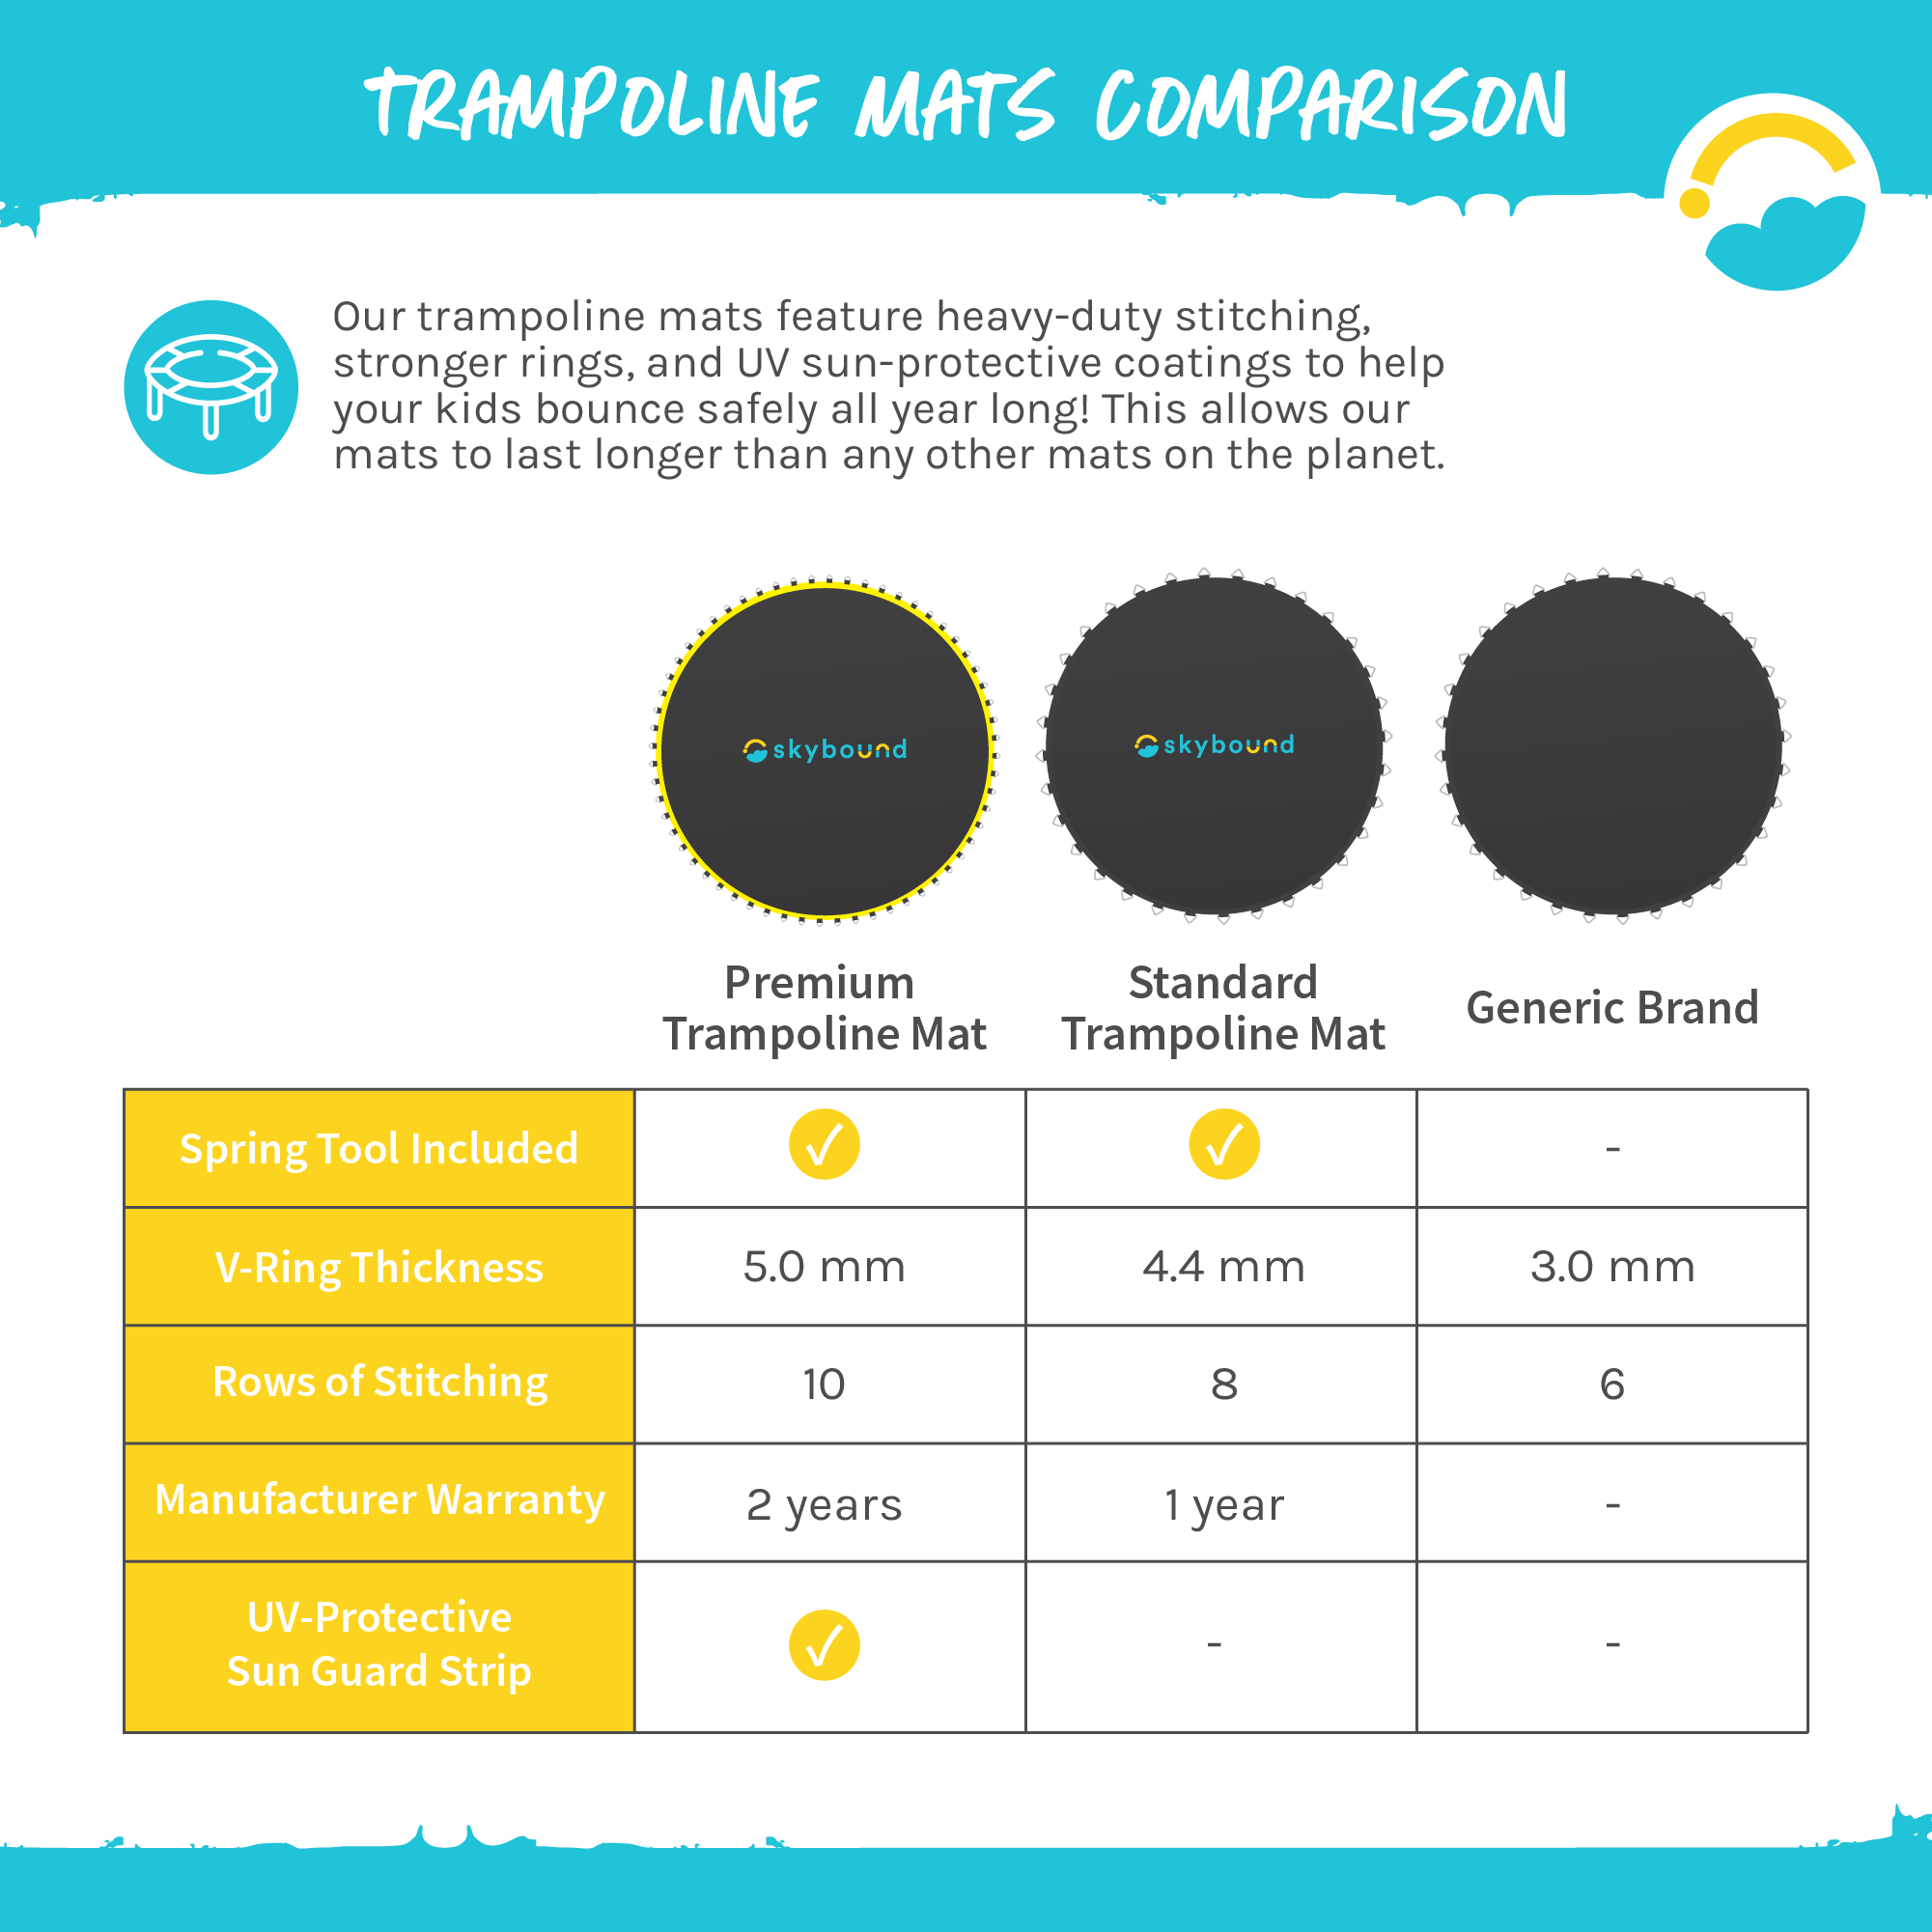 Trampoline Mats Comparison: A comparison chart between Premium Trampoline Mat, Standard Trampoline Mat, Generic Brand. Spring Tool Included: Yes, Yes, No. V-Ring Thickness: 5.0 mm, 4.4 mm, 3.0mm, Row of Stitching: 10, 8, 6. Manufacturer Warranty: 2 Year, 1 Years, No Warranty.  UV-Protective Sun Guard Strip: Yes, No, No.